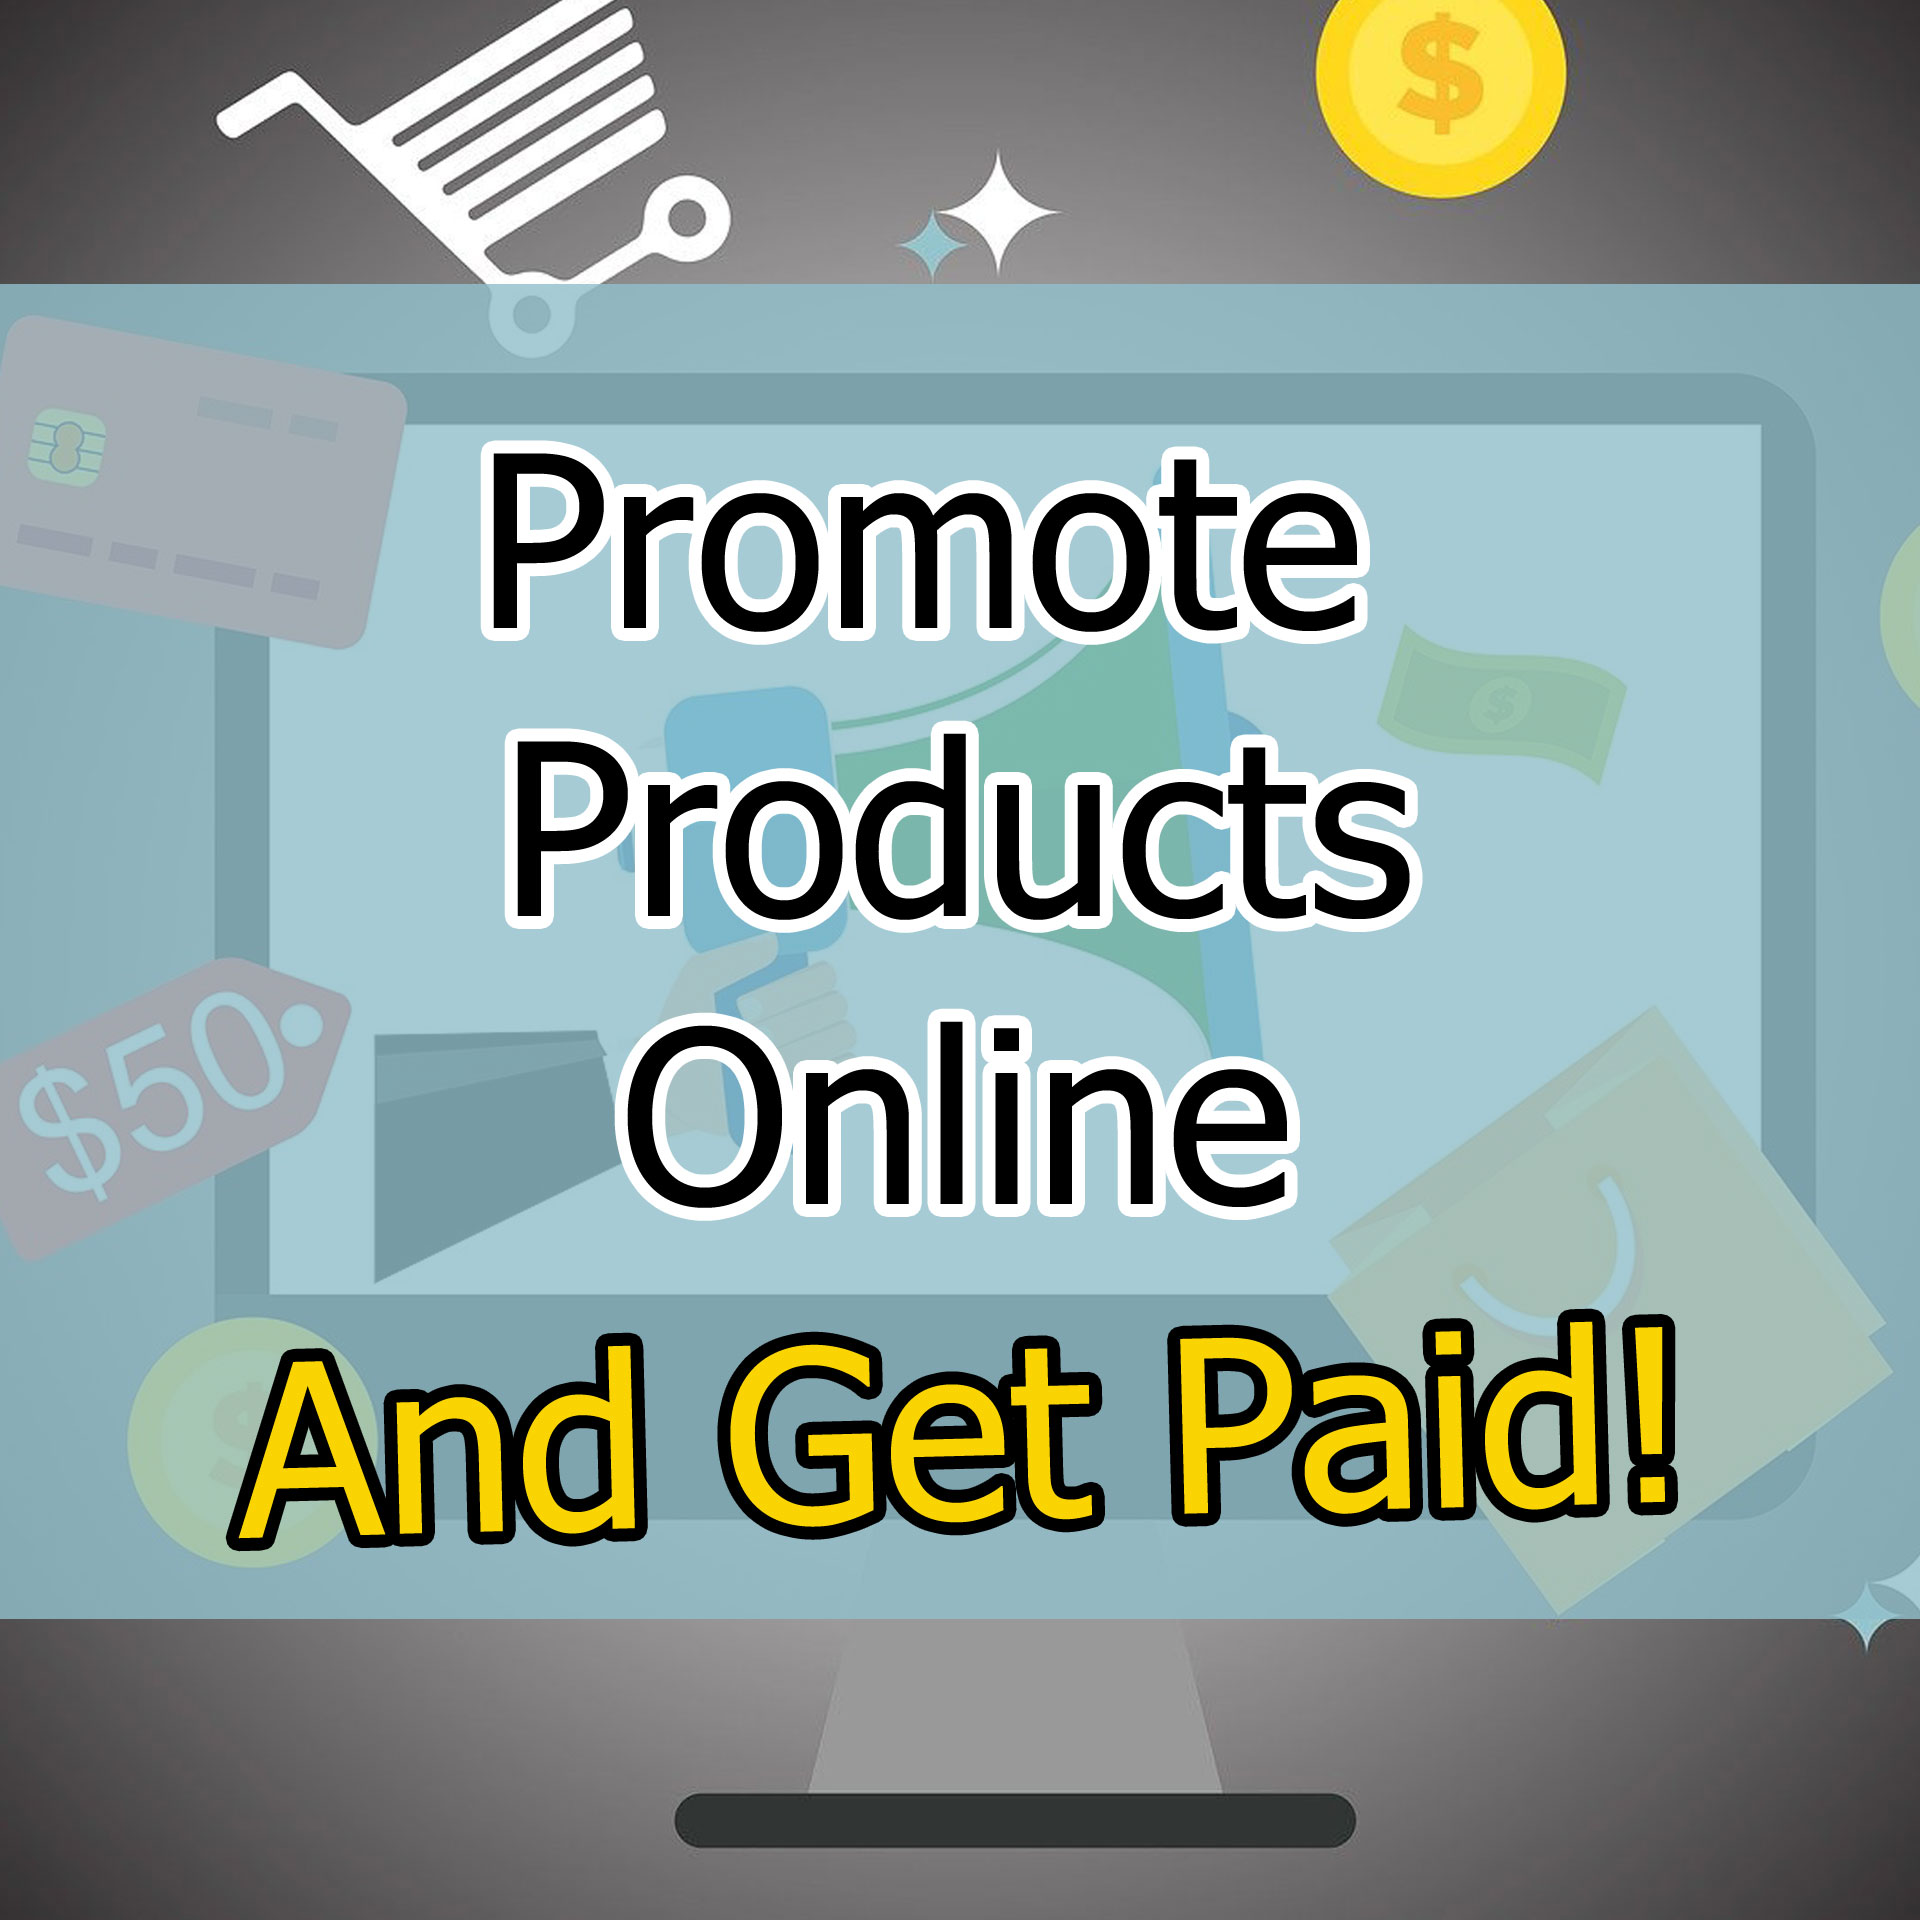 Get Paid To Promote Products Online